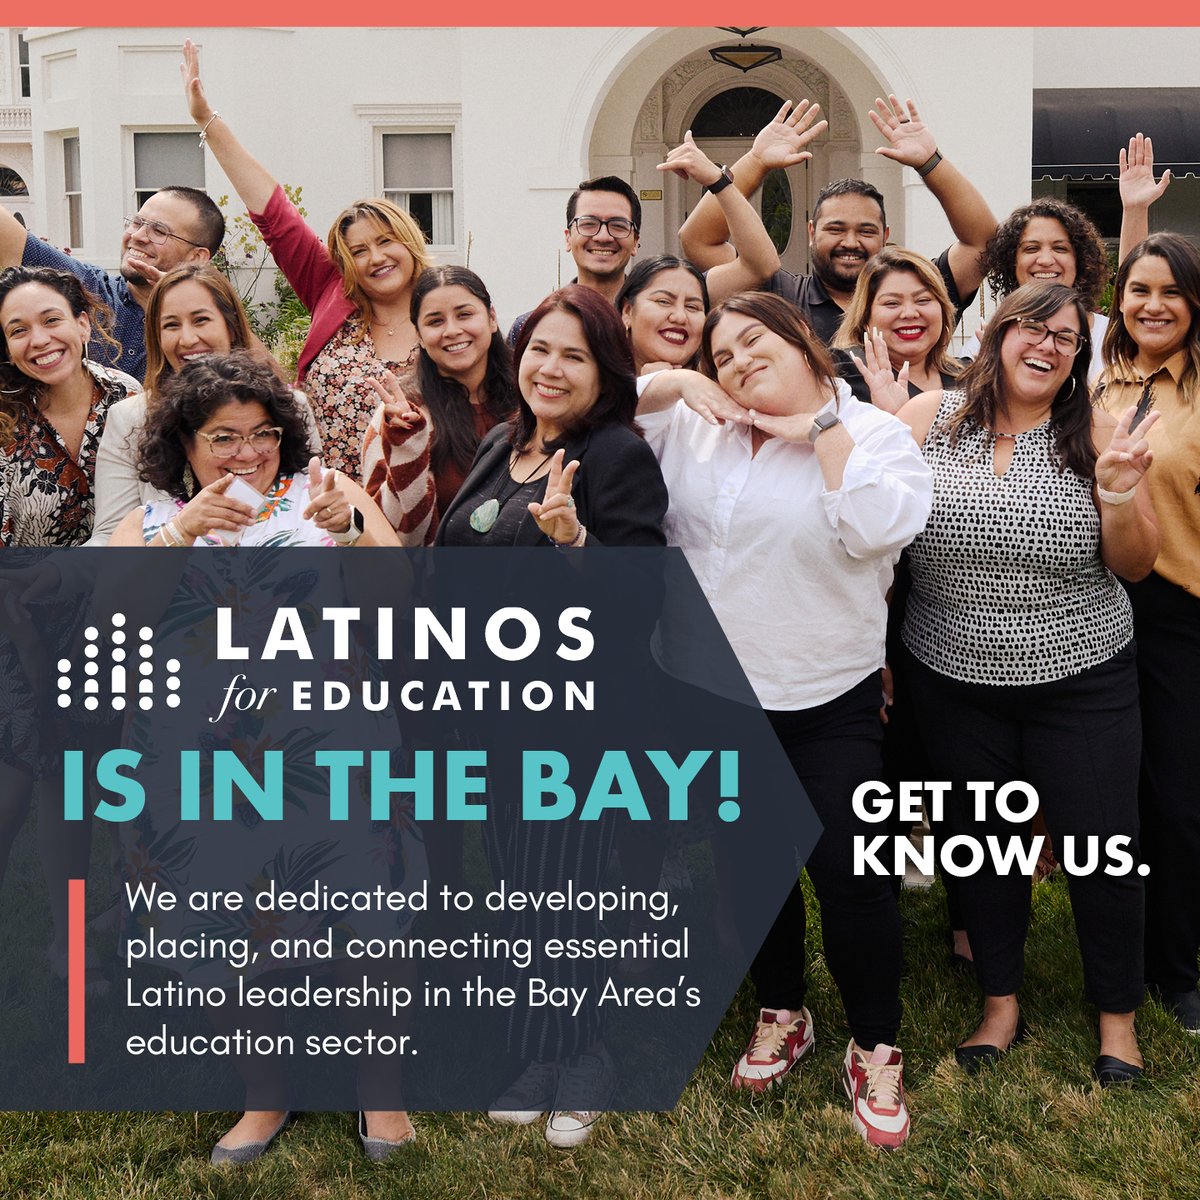 Latino leaders in the Bay should be at the forefront of shaping an equitable education system for Latino students. If you're an educator who want to develop as a leader, we're here to help you unlock your full potential! Learn more about our work: hubs.la/Q02vcl080